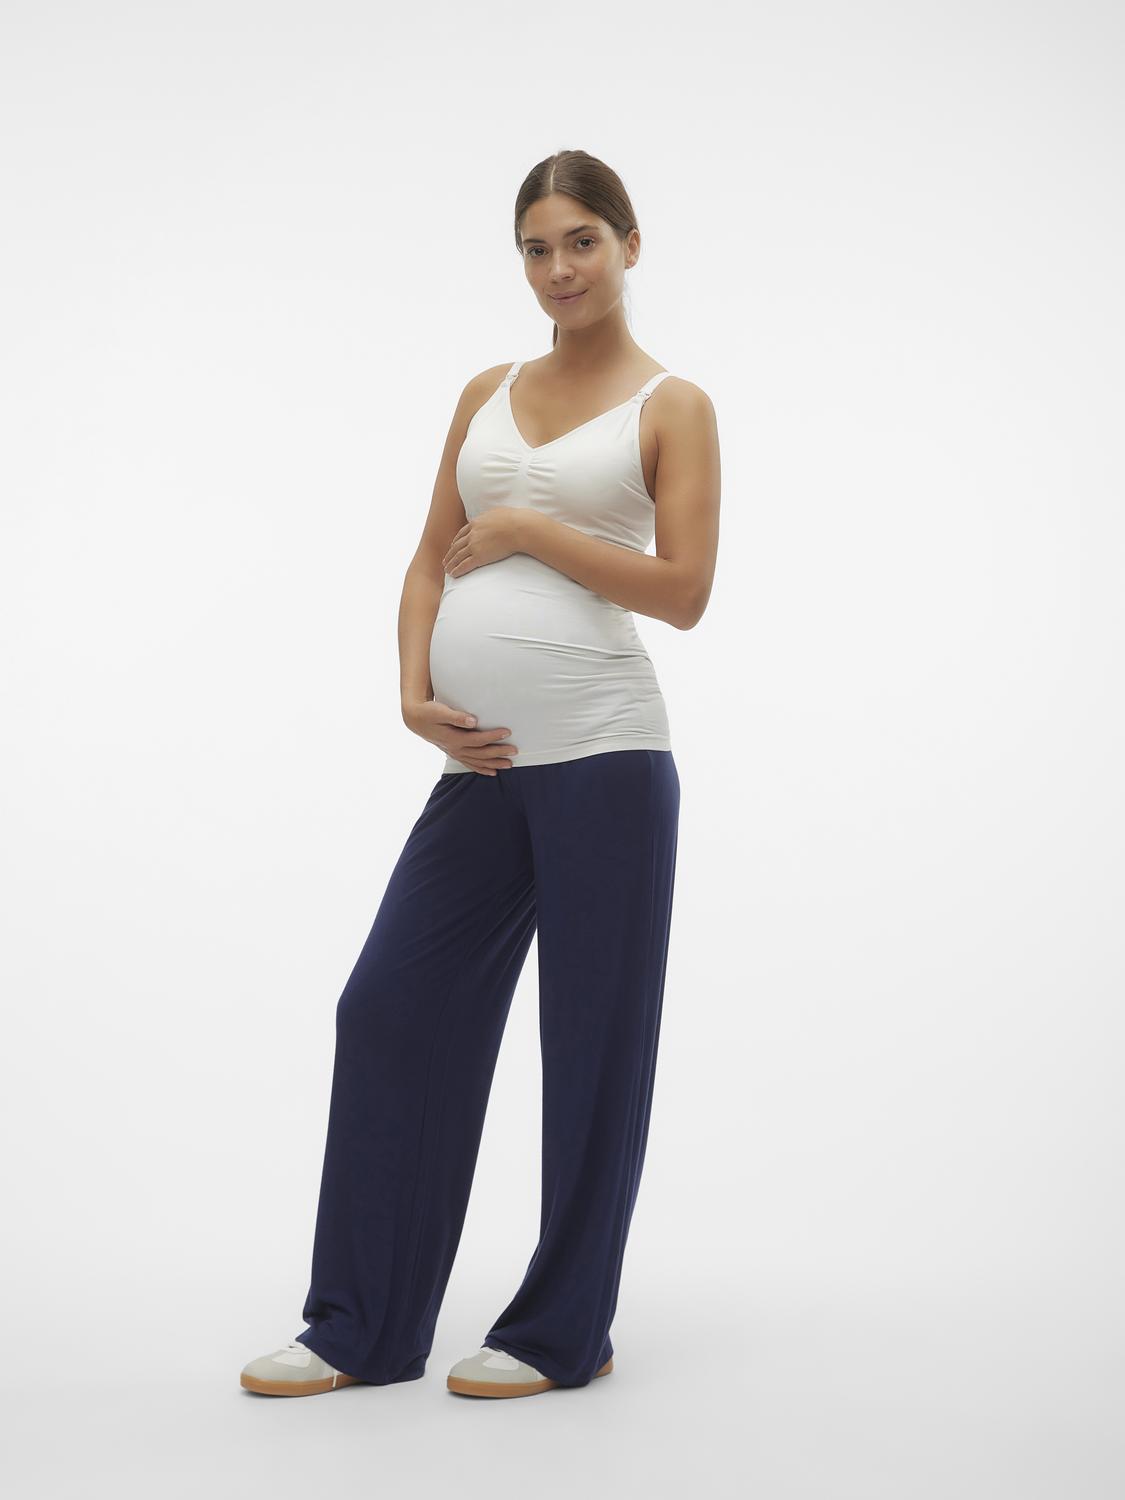 MAMA.LICIOUS Maternity-trousers -Naval Academy - 20019864